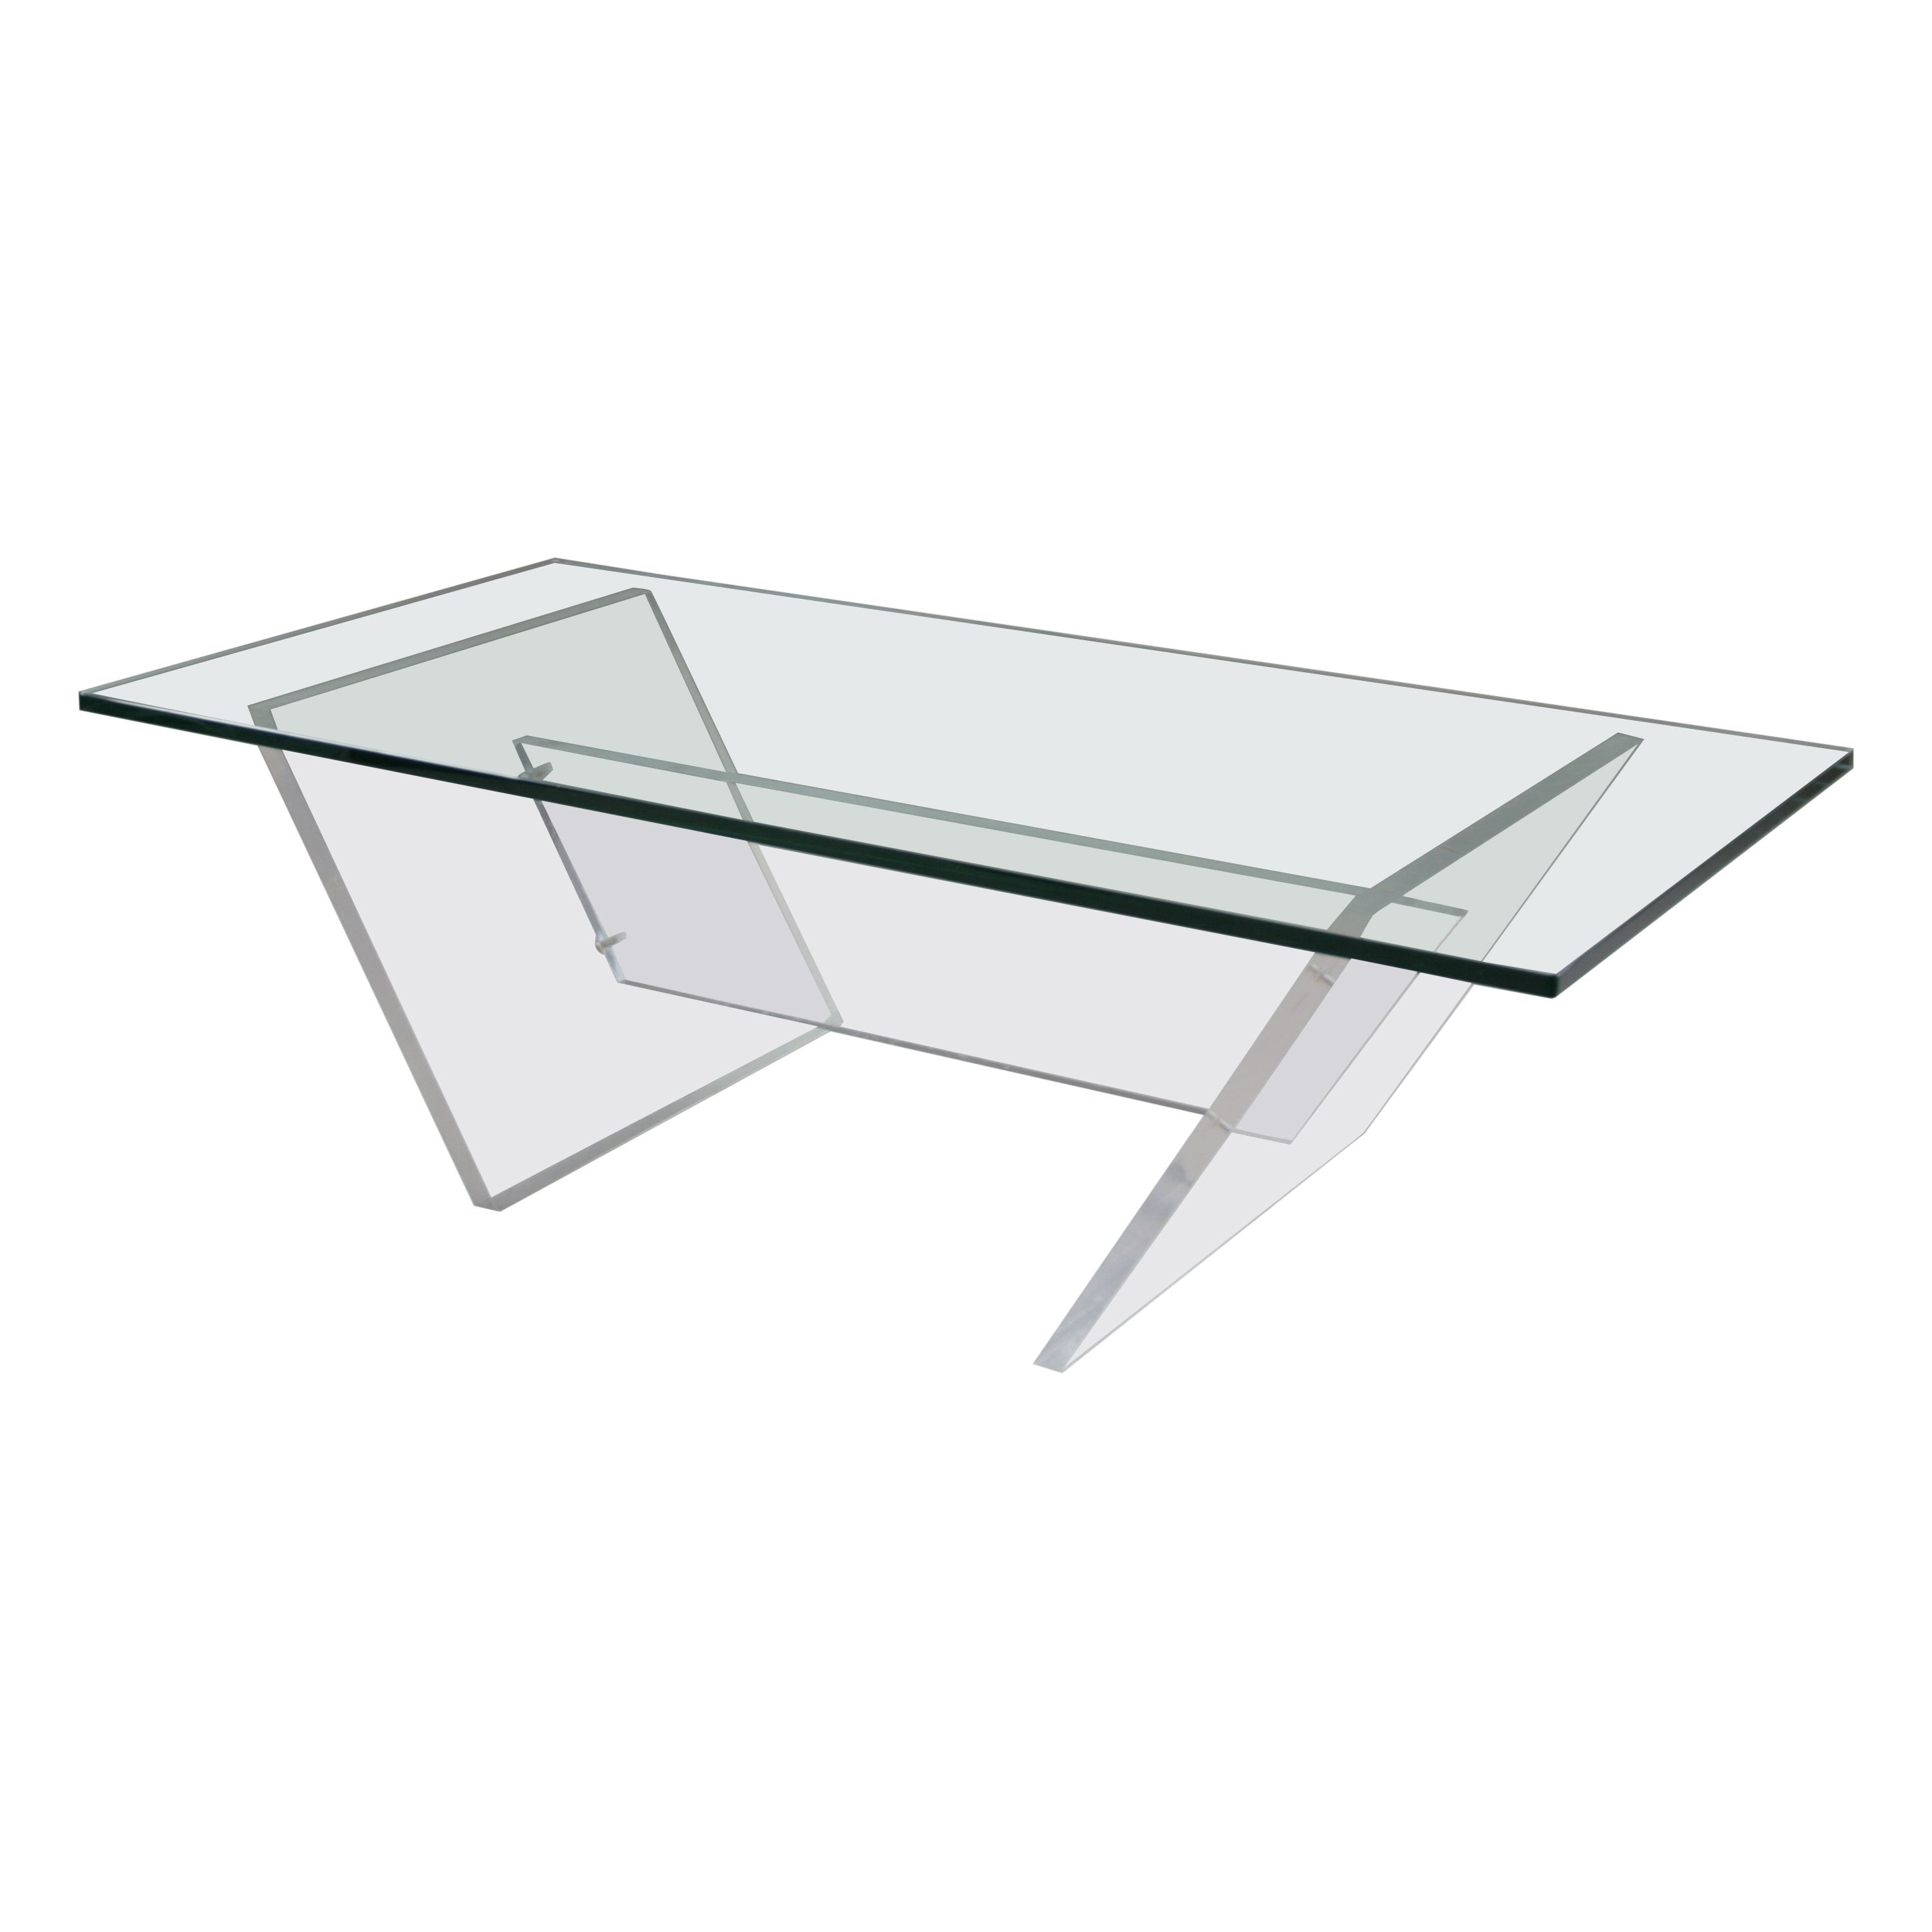 French Plexiglass and Glass Coffee Table, 1980s For Sale